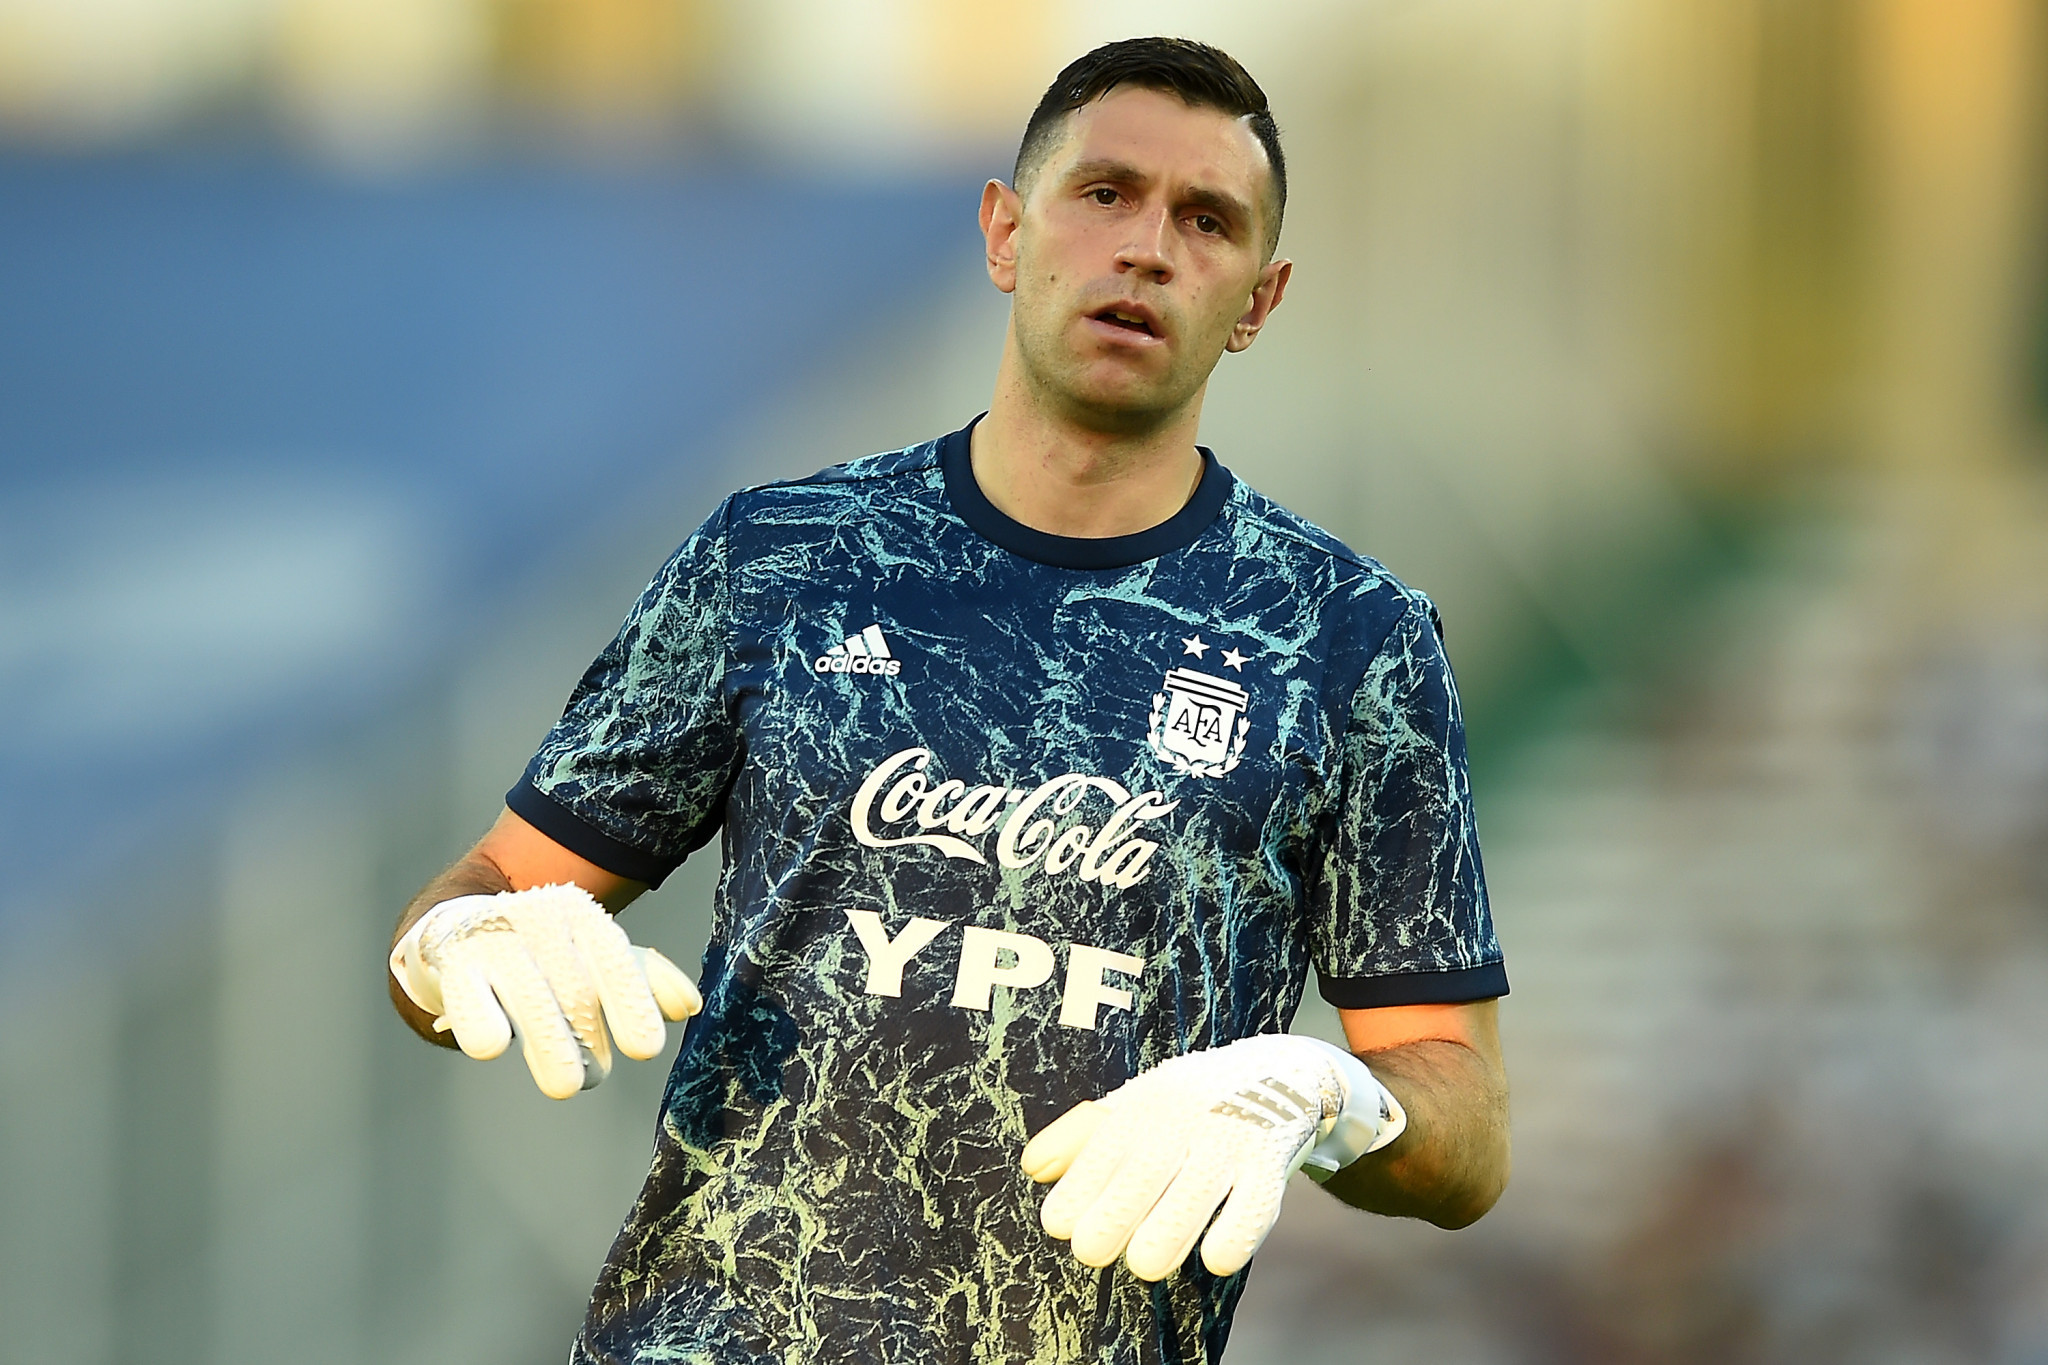 Four Argentina players, including goalkeeper Emiliano Martínez, have been banned for two matches for their roles in the abandonment of the match against Brazil ©Getty Images